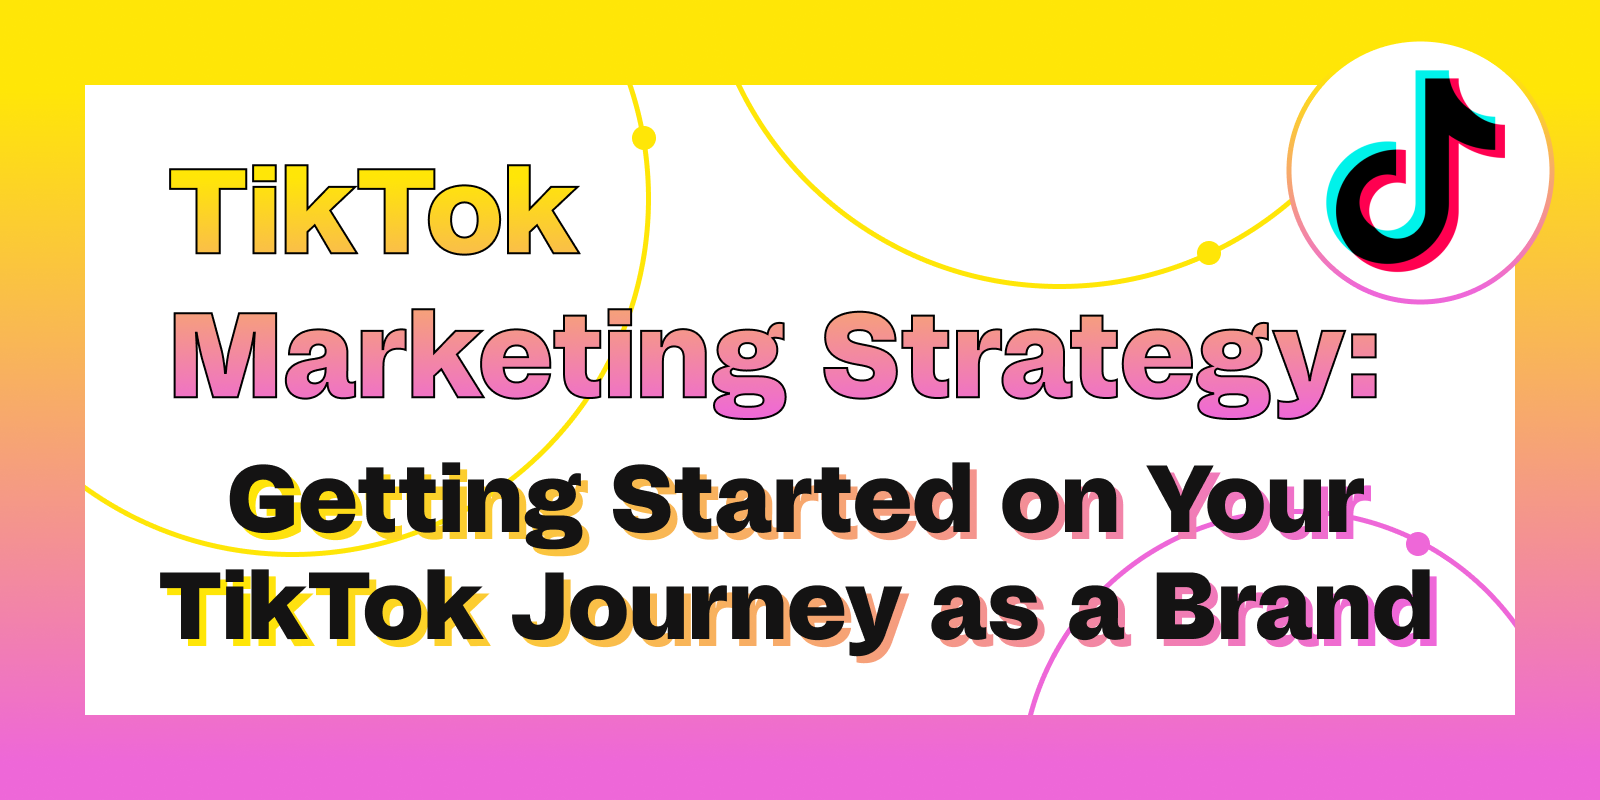 TikTok Ads: The Complete Guide for Businesses and Brands with Examples -  NoGood™: Growth Marketing Agency